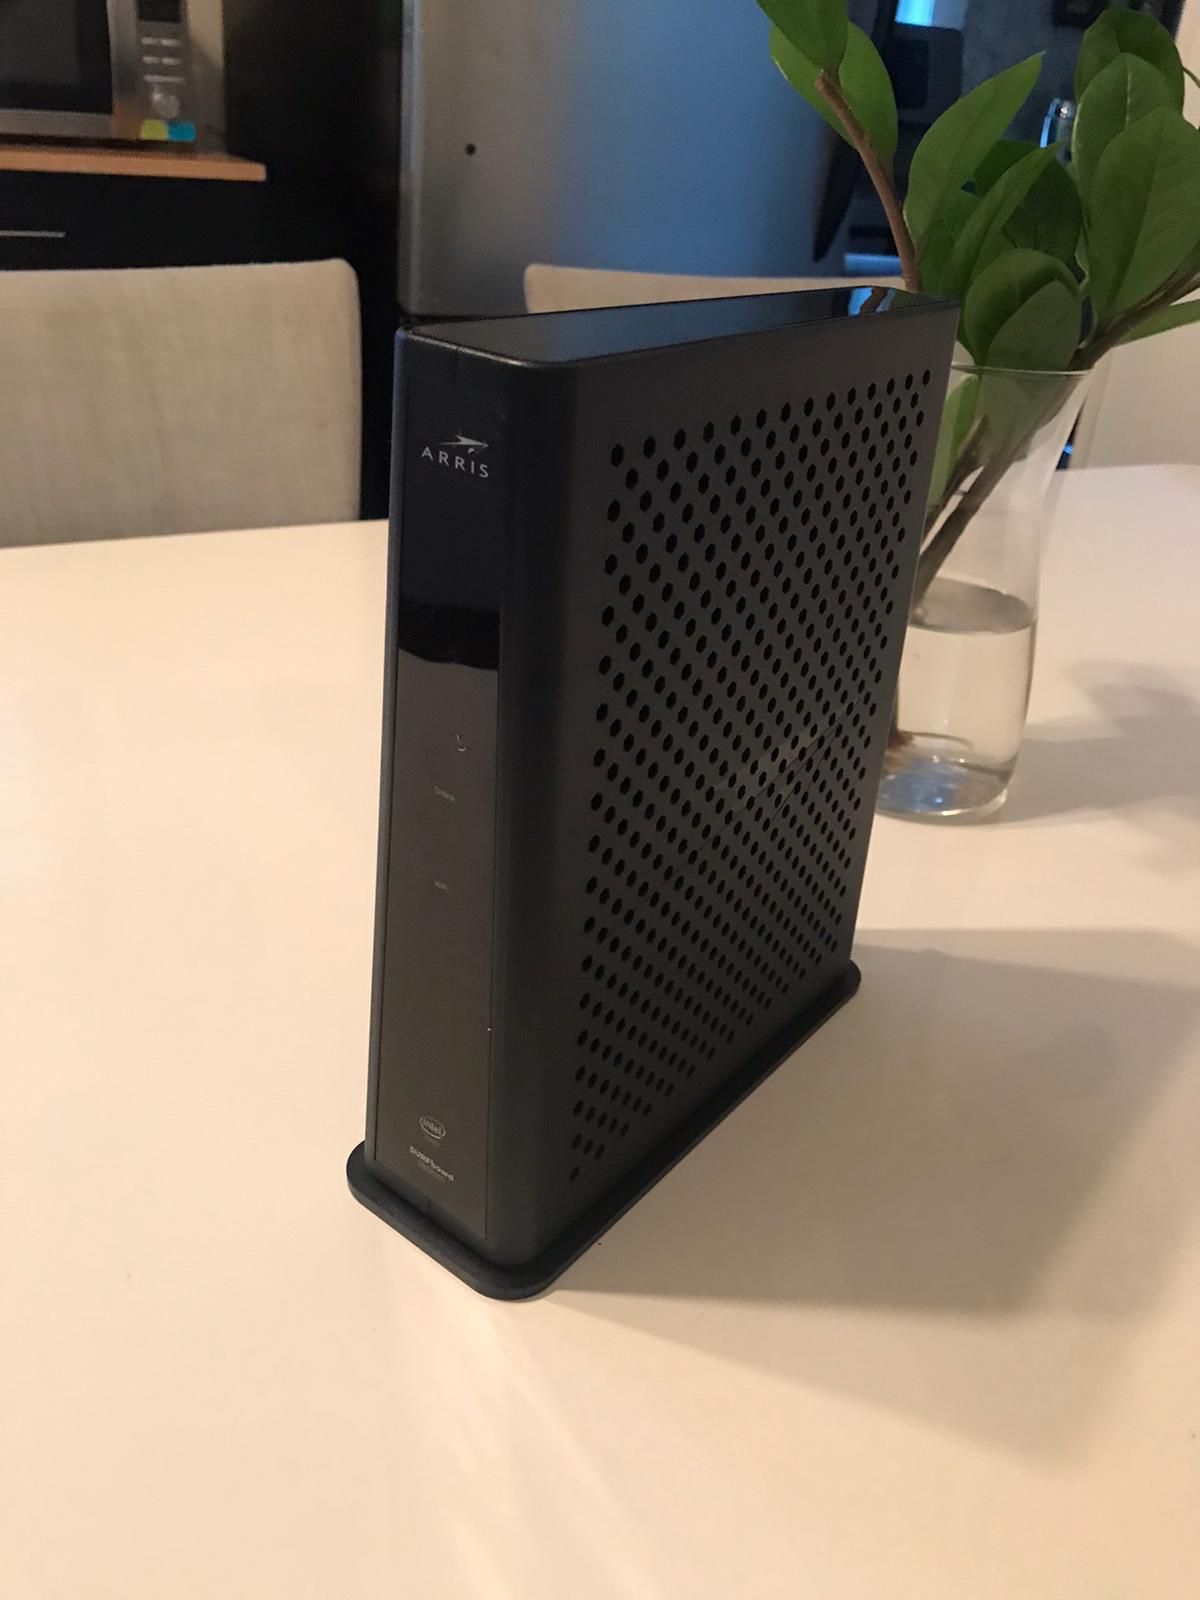 Arris SURFBOARD SBG8300 Cable Modem and WiFi Router